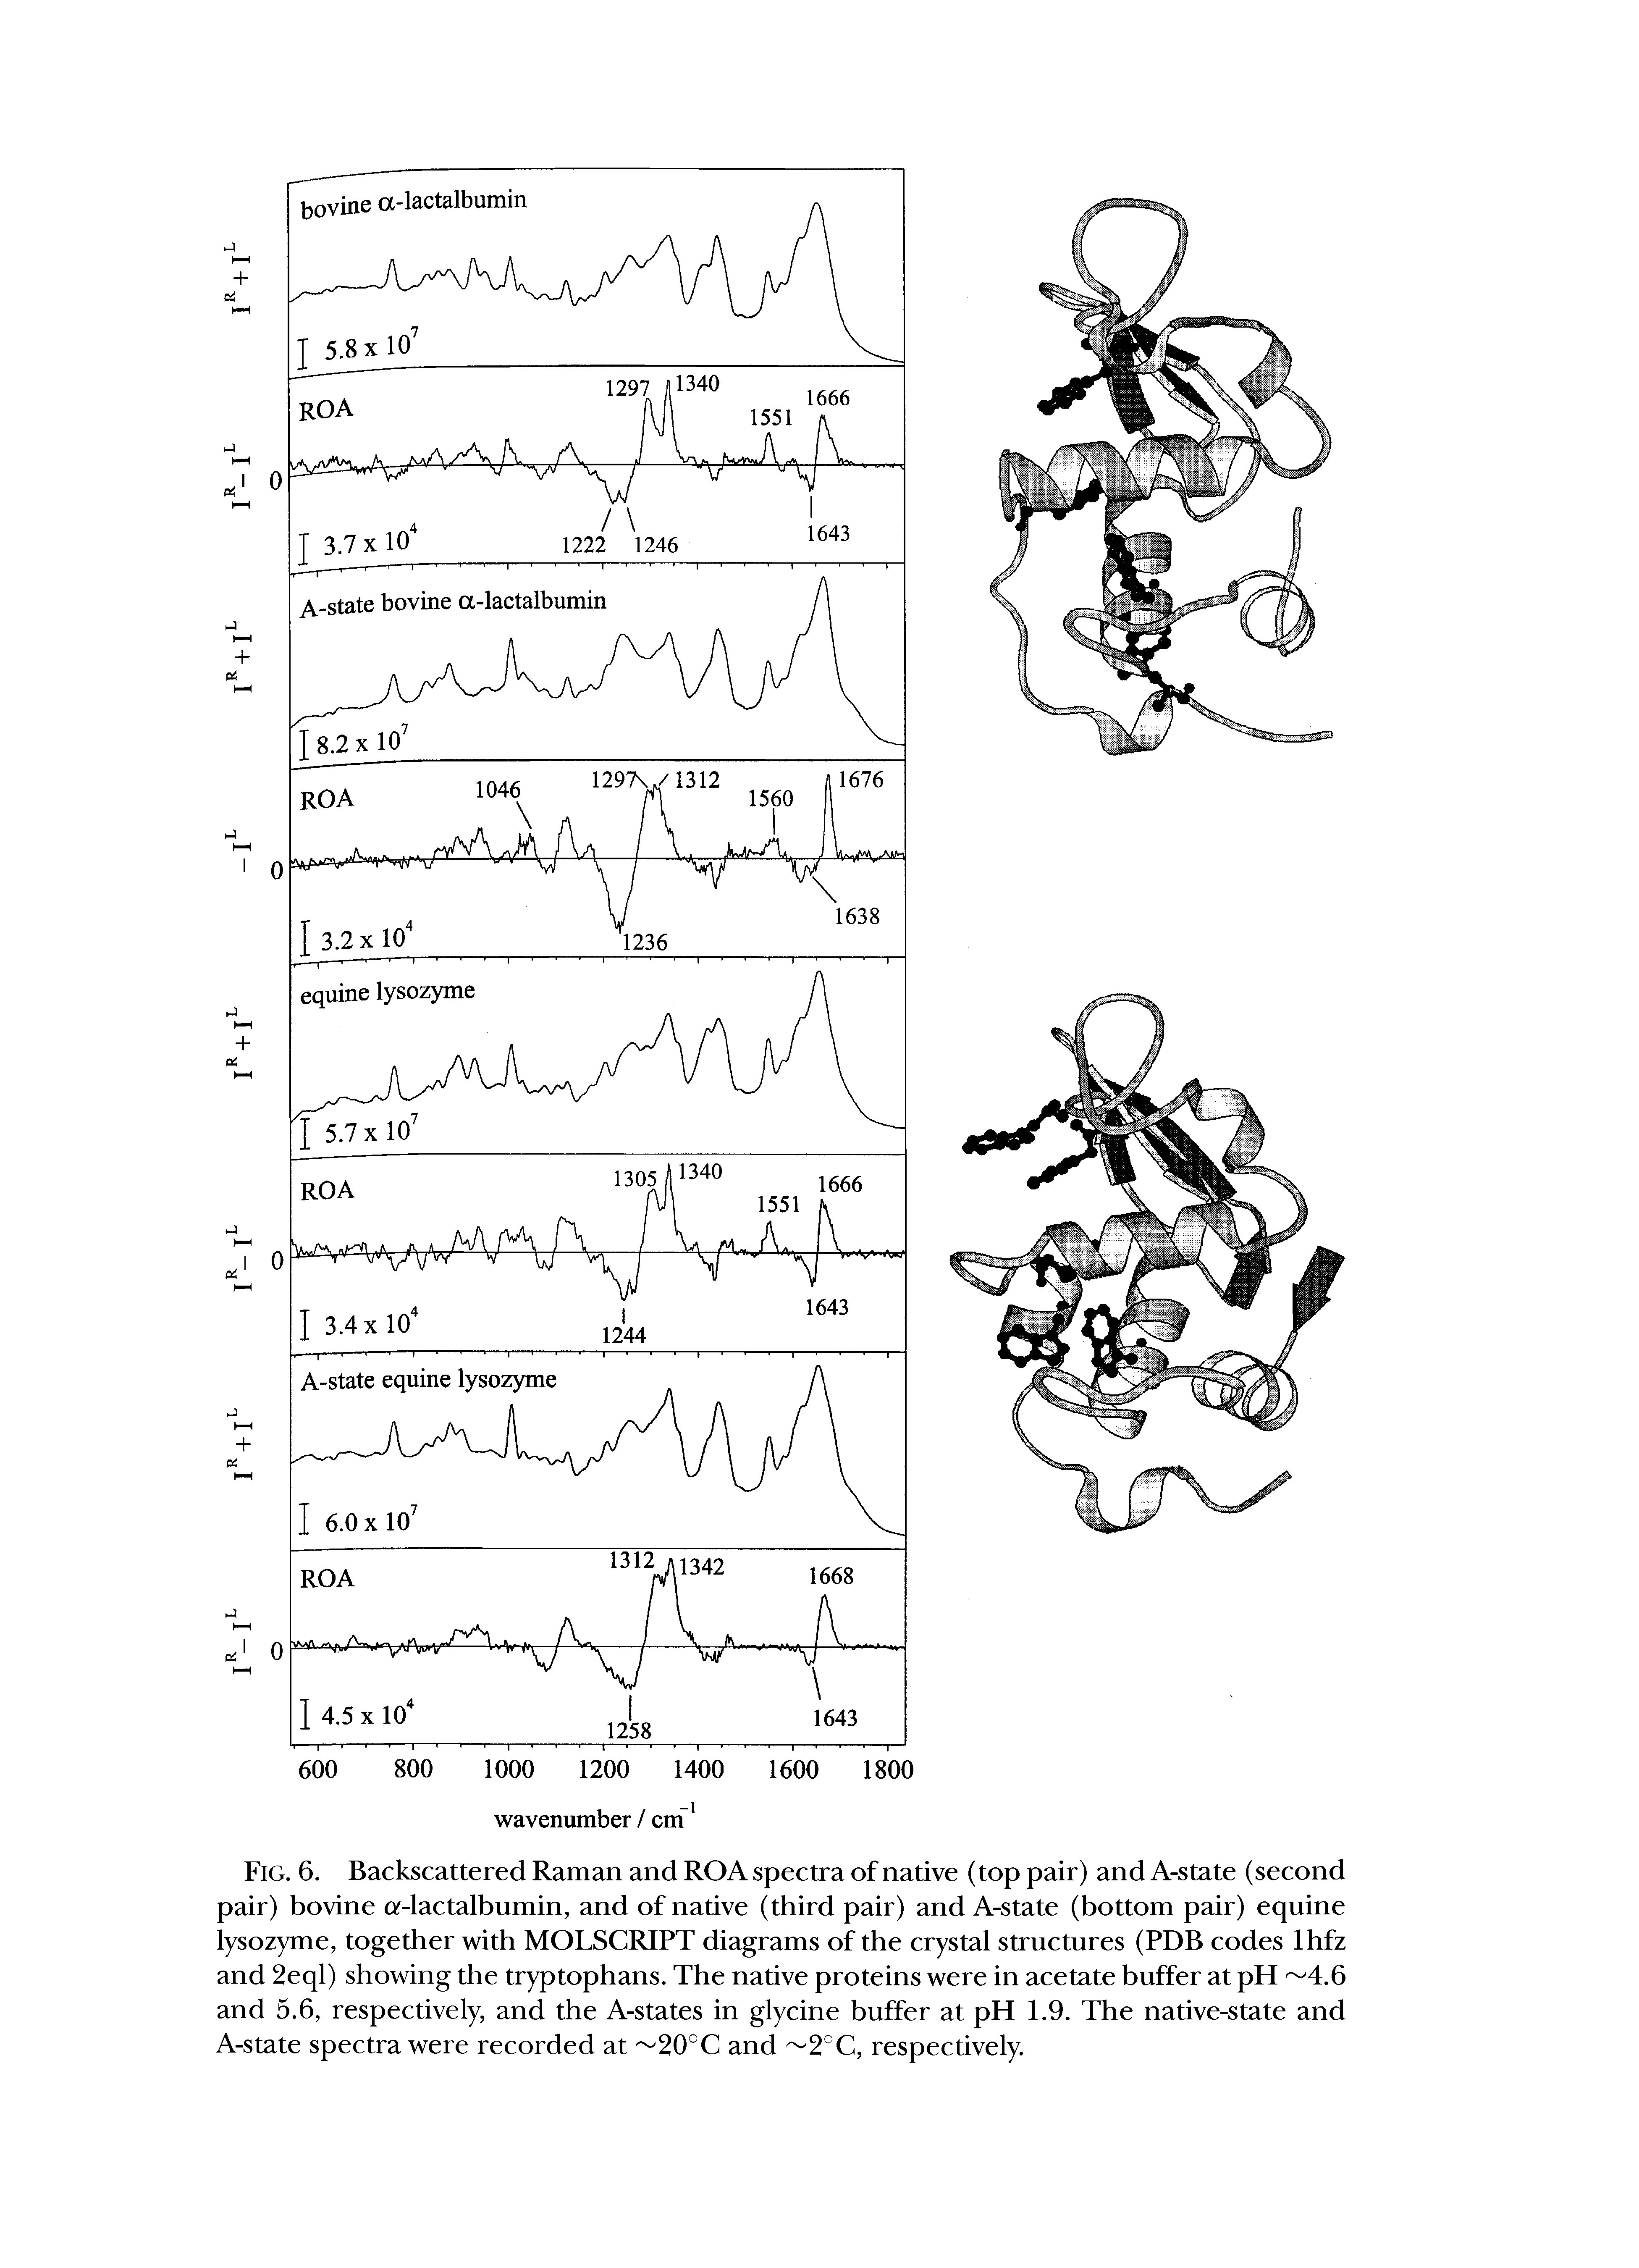 Fig. 6. Backscattered Raman and ROA spectra of native (top pair) and A-state (second pair) bovine G -lactalbumin, and of native (third pair) and A-state (bottom pair) equine lysozyme, together with MOLSCRIPT diagrams of the crystal structures (PDB codes lhfz and 2eql) showing the tryptophans. The native proteins were in acetate buffer at pH 4.6 and 5.6, respectively, and the A-states in glycine buffer at pH 1.9. The native-state and A-state spectra were recorded at 20°C and 2°C, respectively.